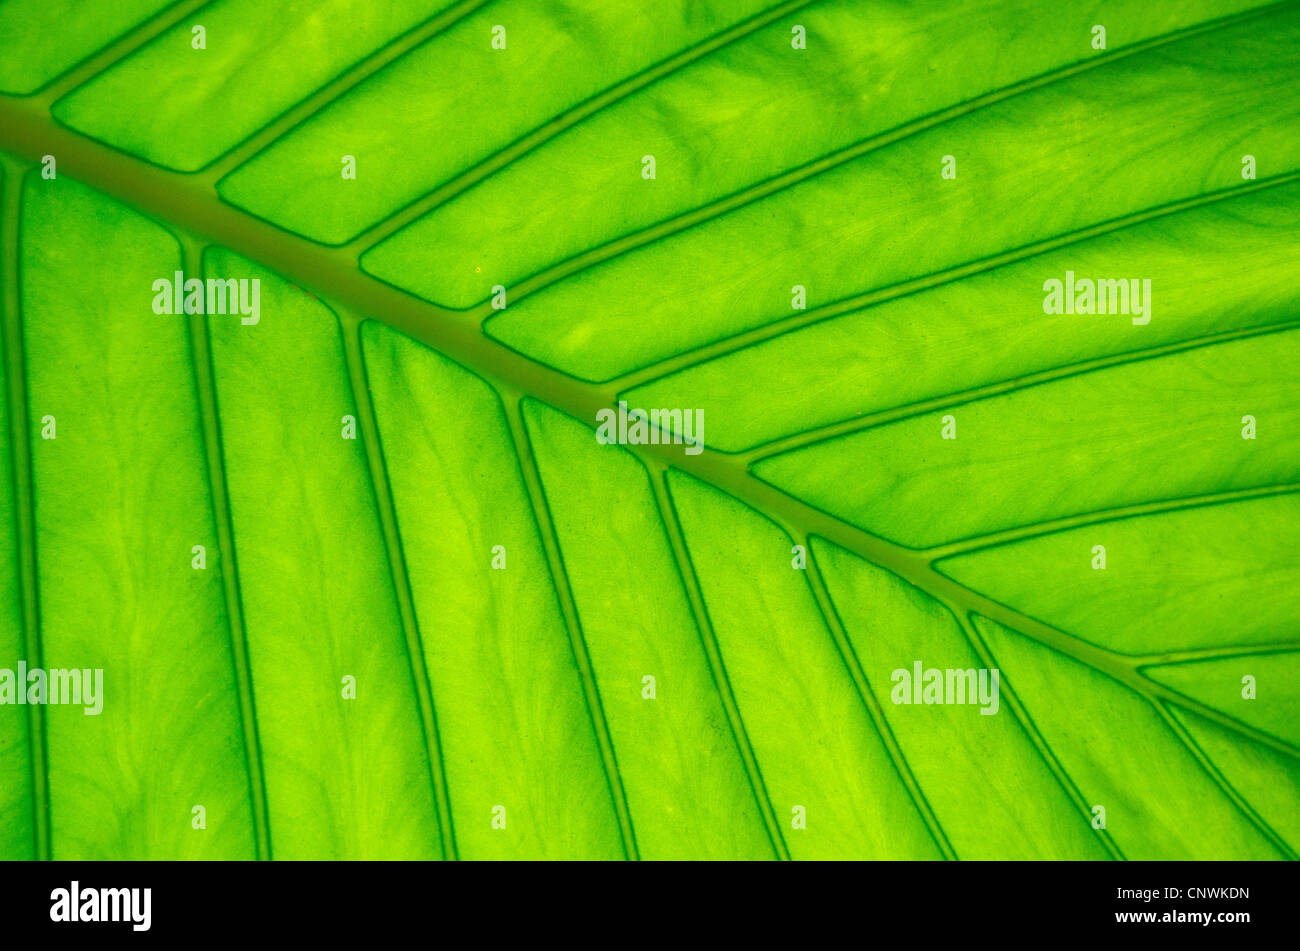 Texture of a green leaf as background Stock Photo